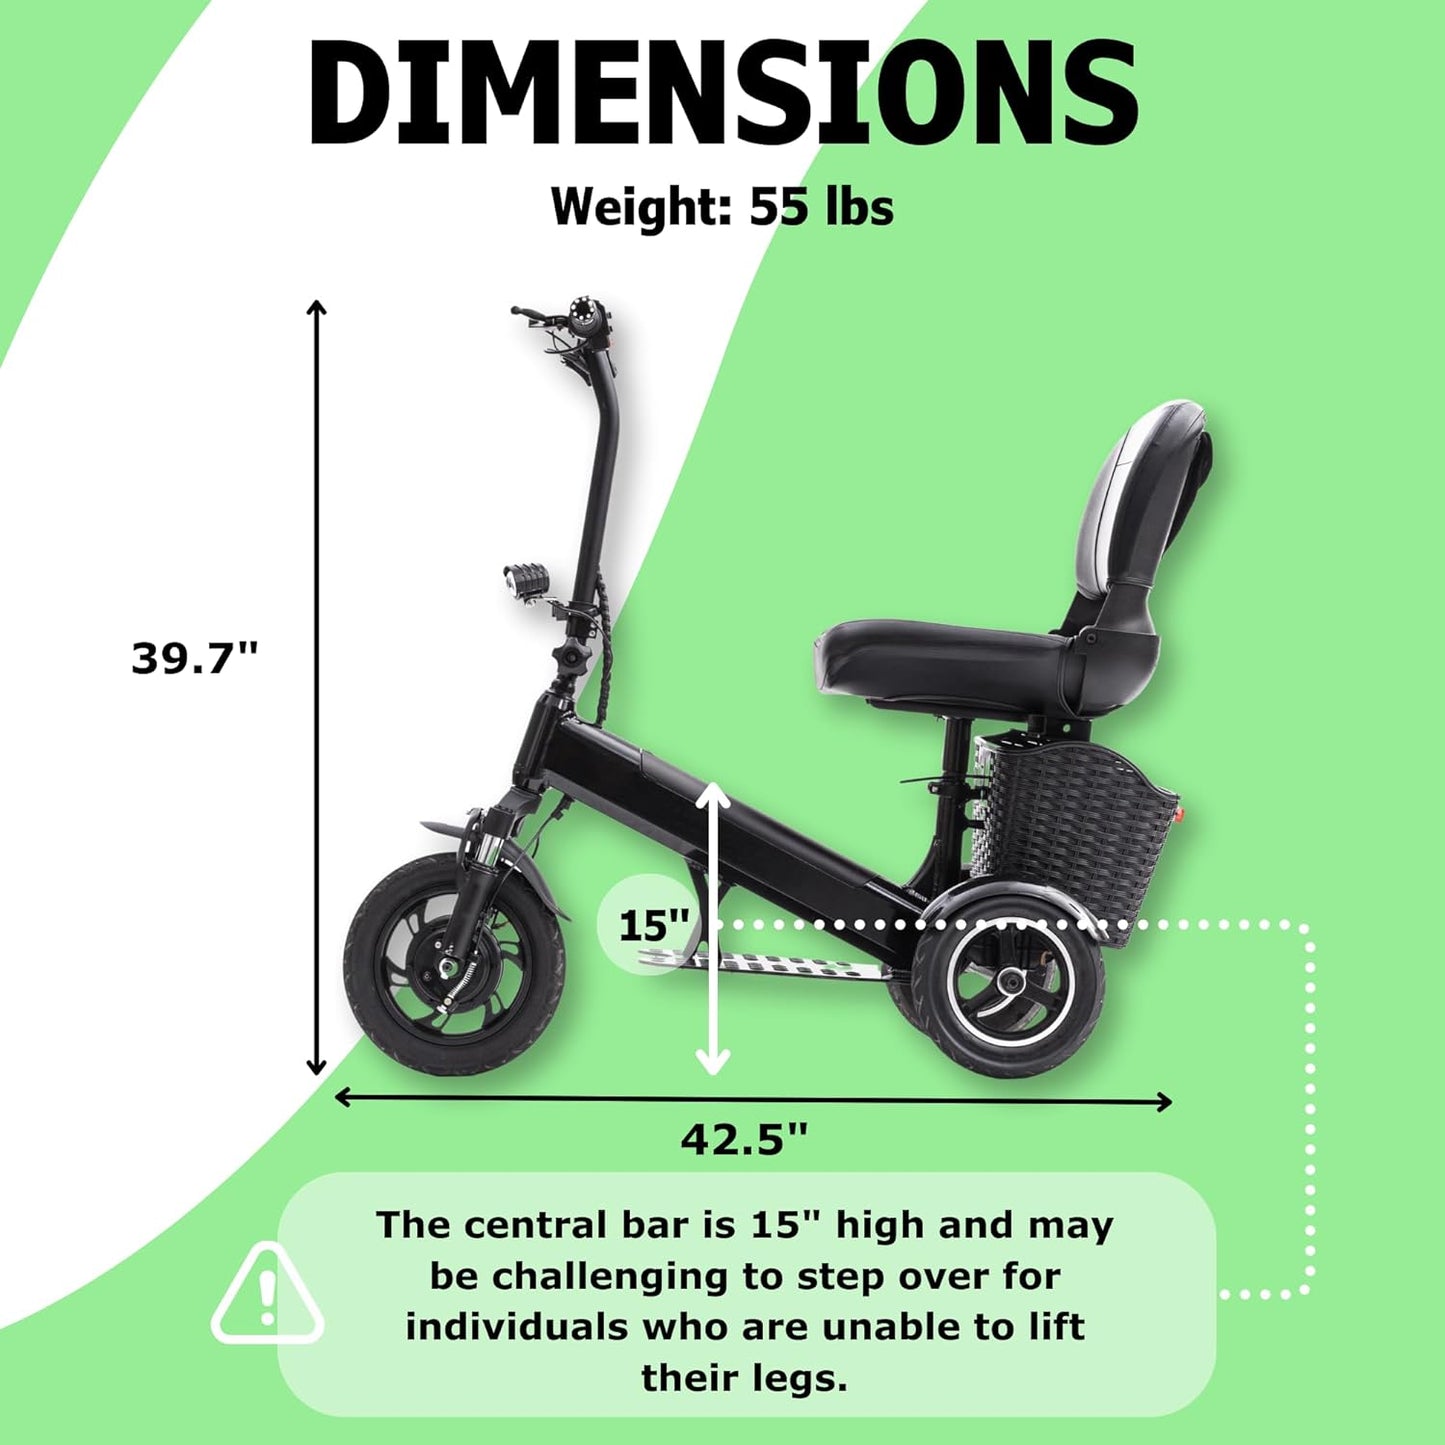 MobiliGo - 3 Wheel Foldable Electric Mobility Scooters for Adults, Seniors, and Elderly - Folding Scooter Lightweight - Long Range Travel, Power Extended Battery with Charger and Basket Included